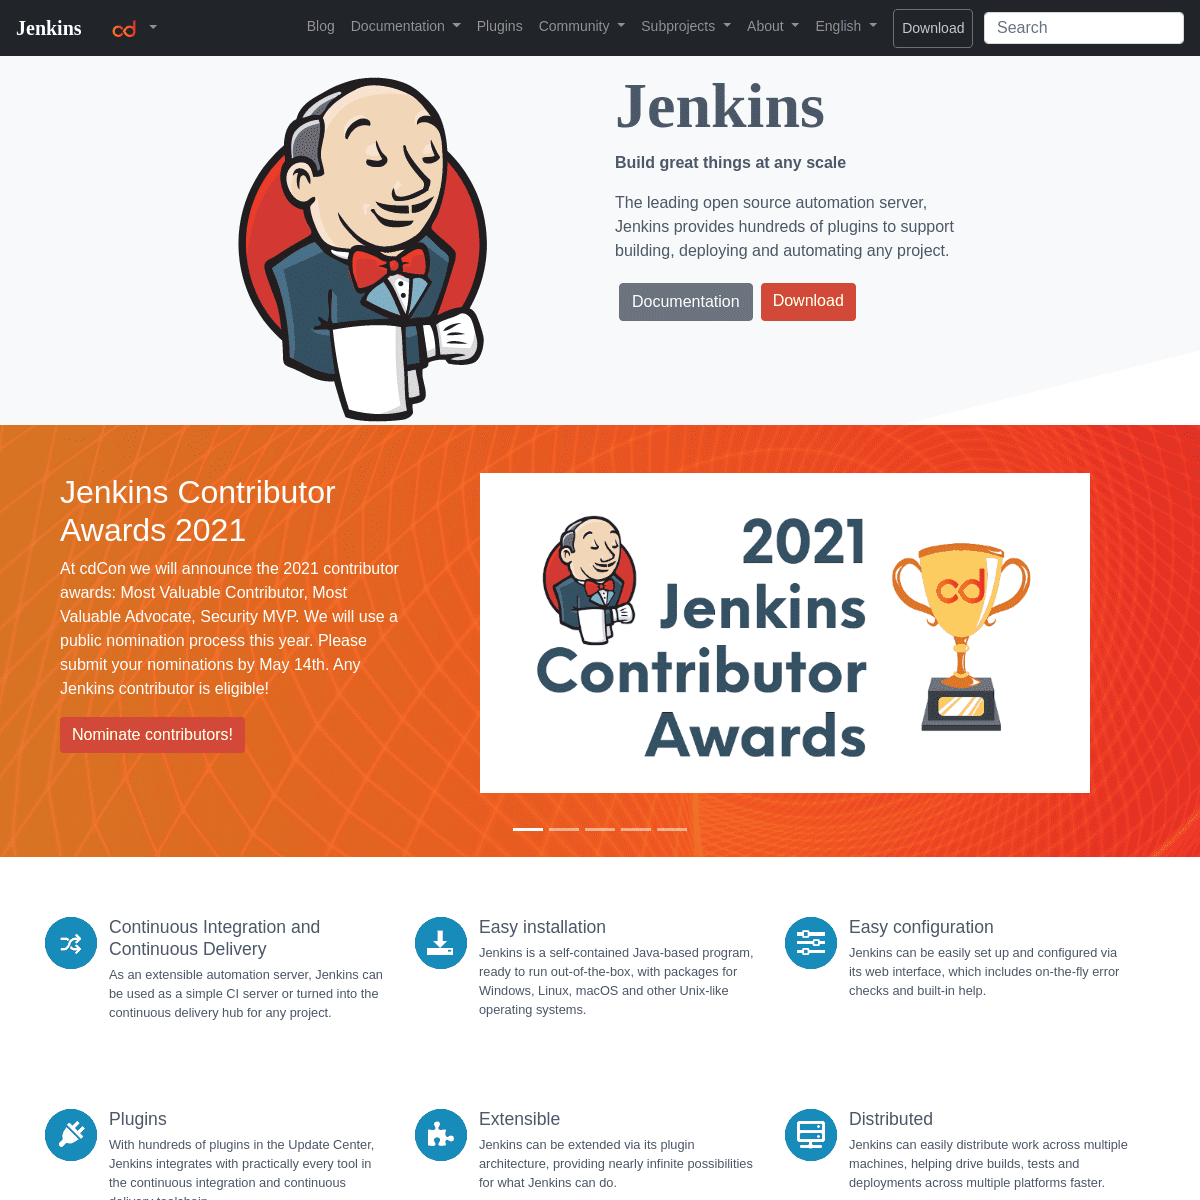 A complete backup of https://jenkins.io